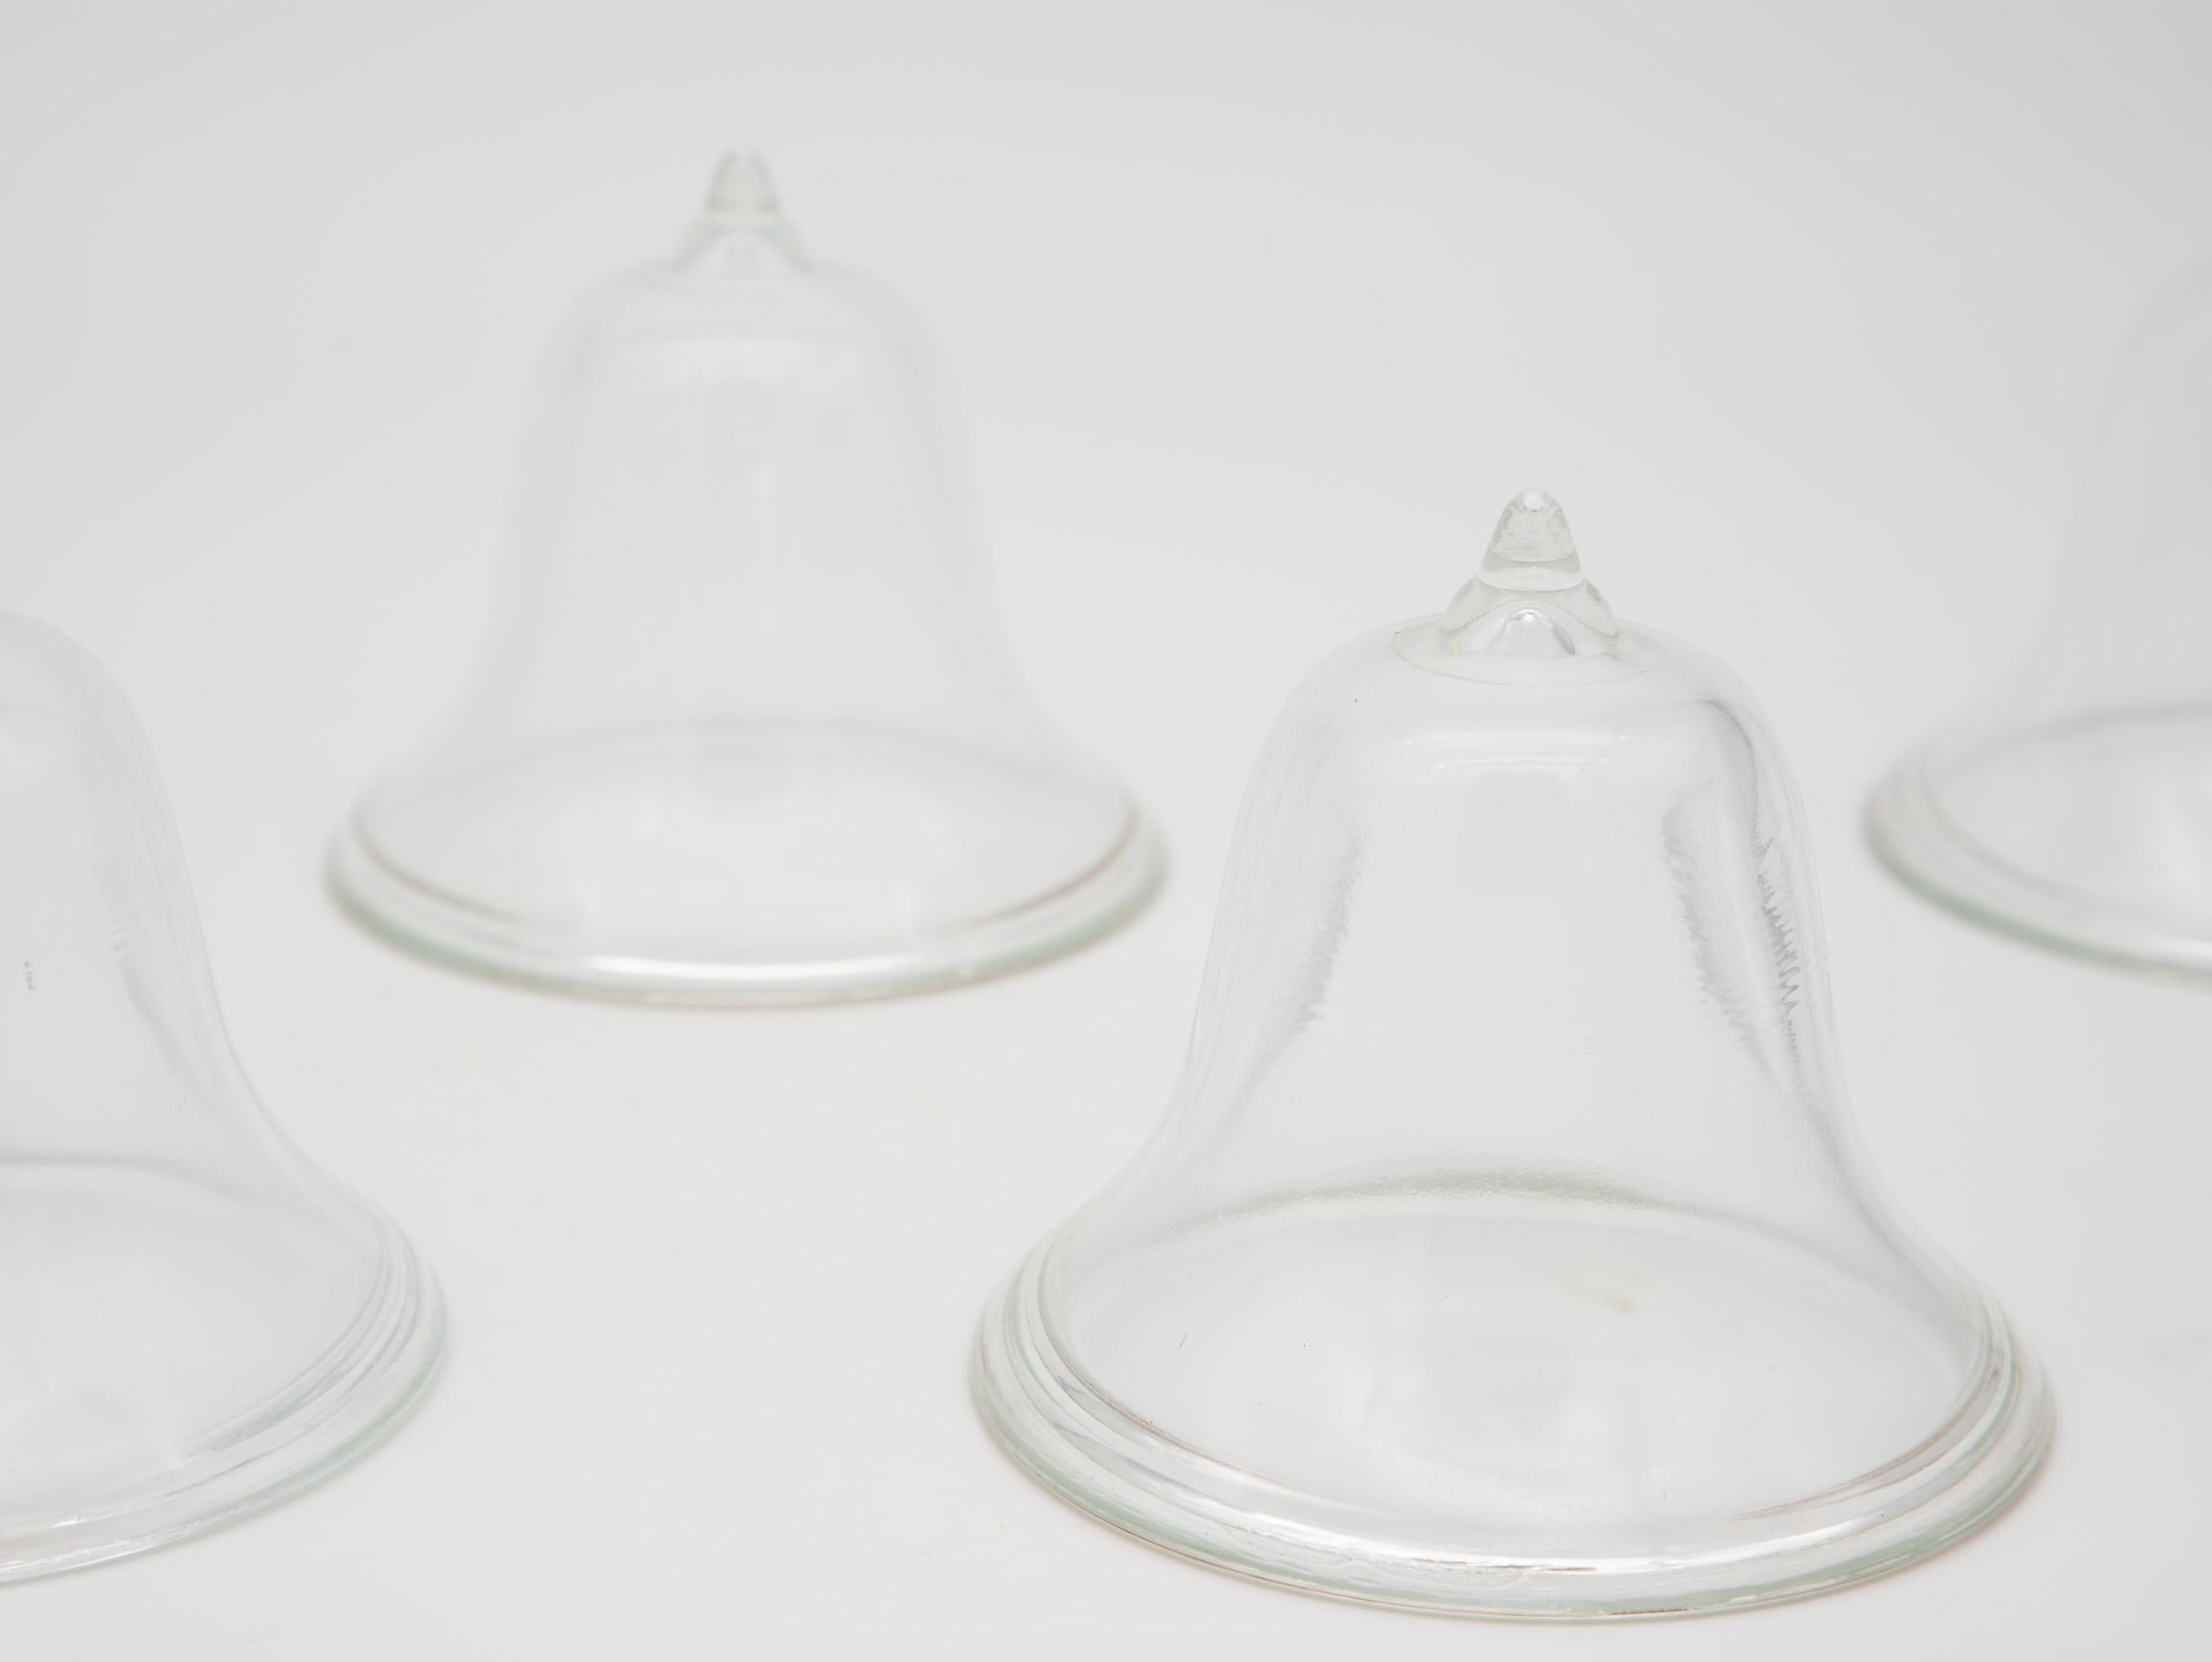 A set of four mini glass cloches. Ideal table top or bookshelf size. French midcentury. Wear consistent with age and use.